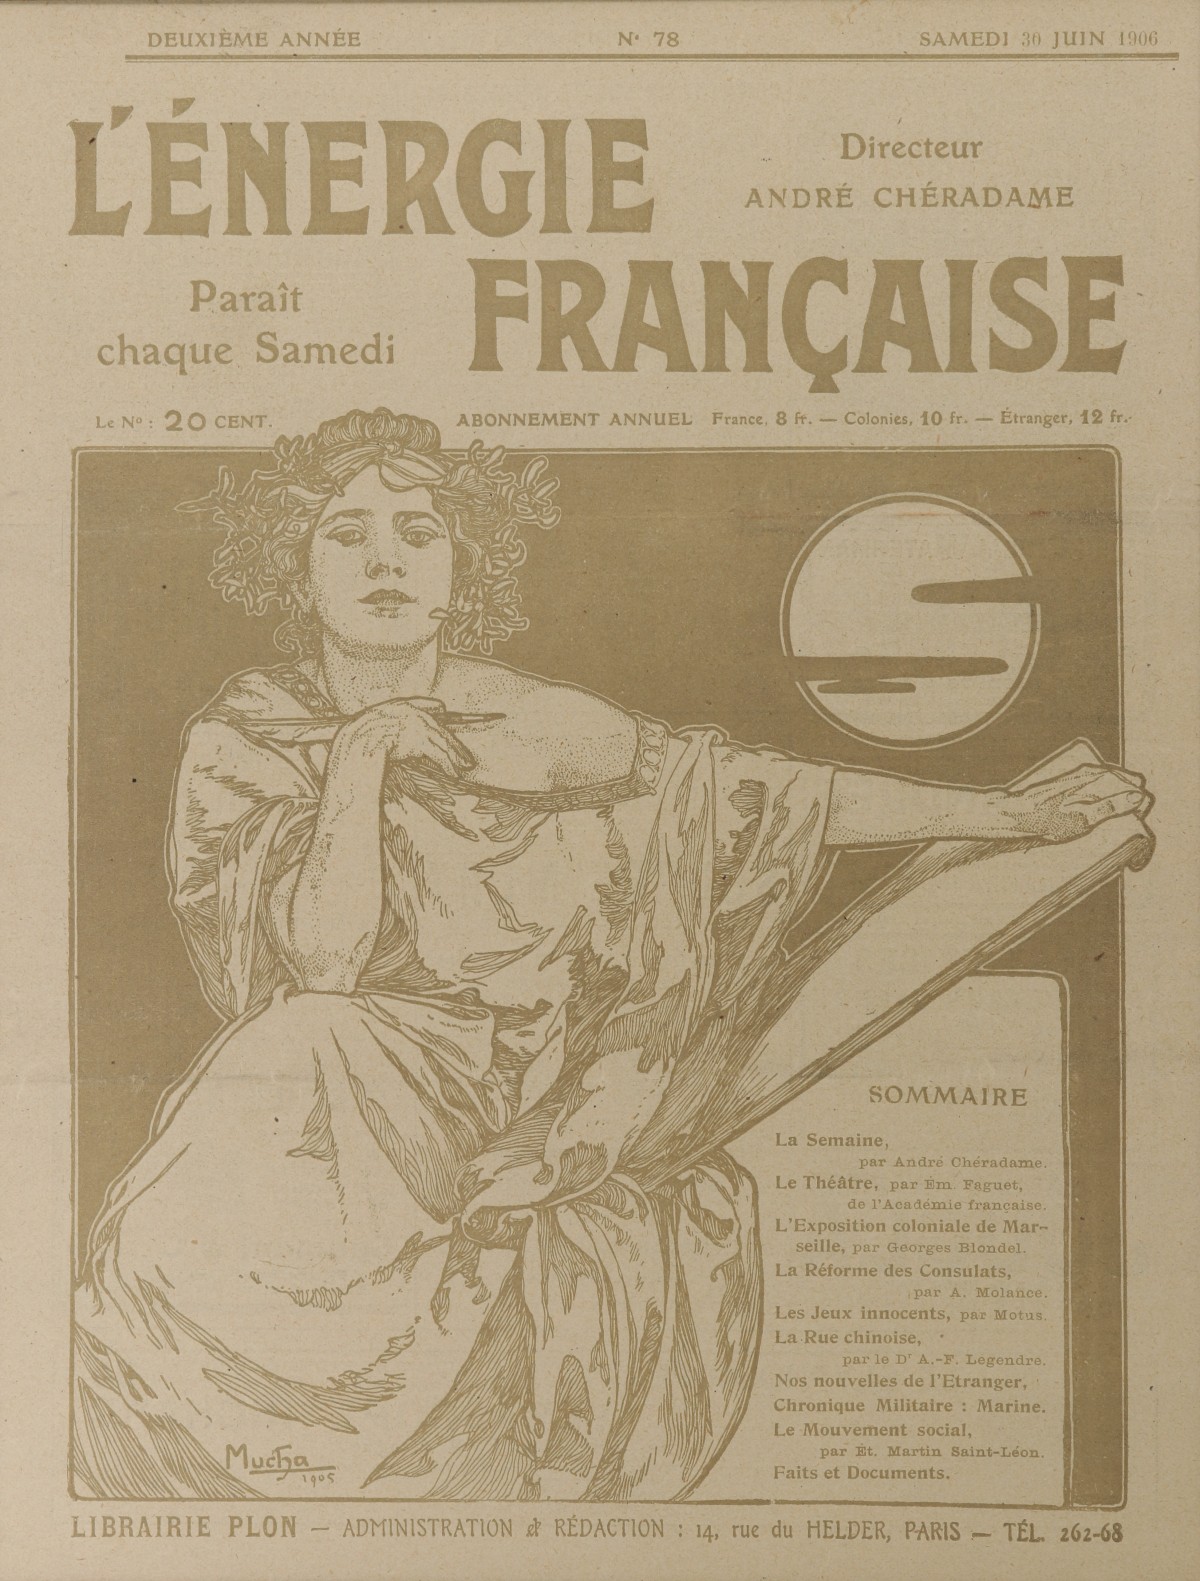 MUCHA COVER ILLUSTRATION FOR L'ENERGIE FRANCAISE 1906